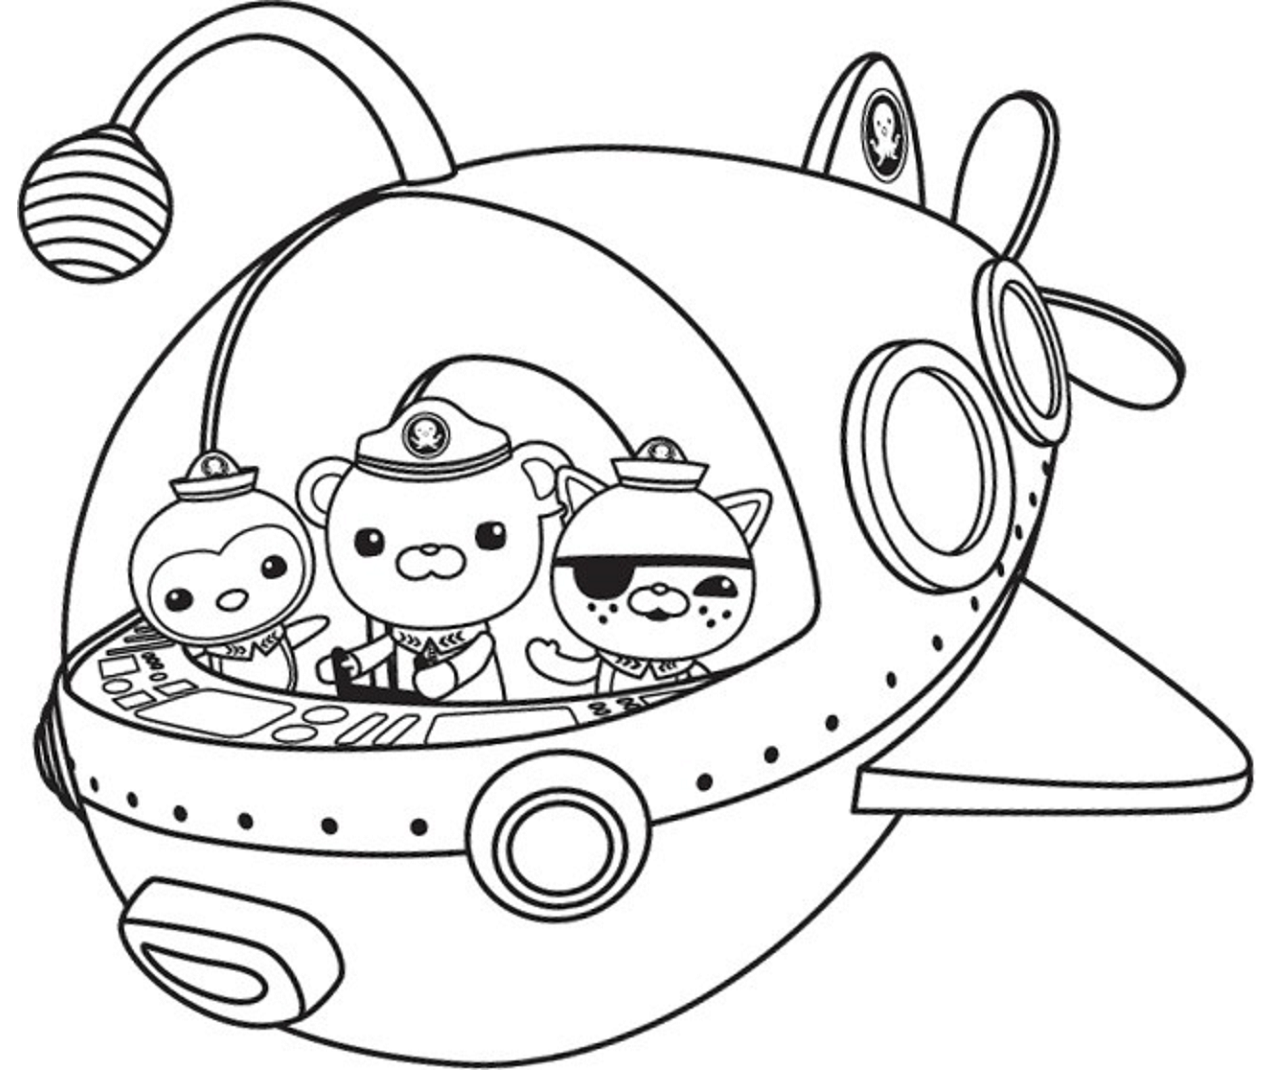 aquanauts-coloring-pages